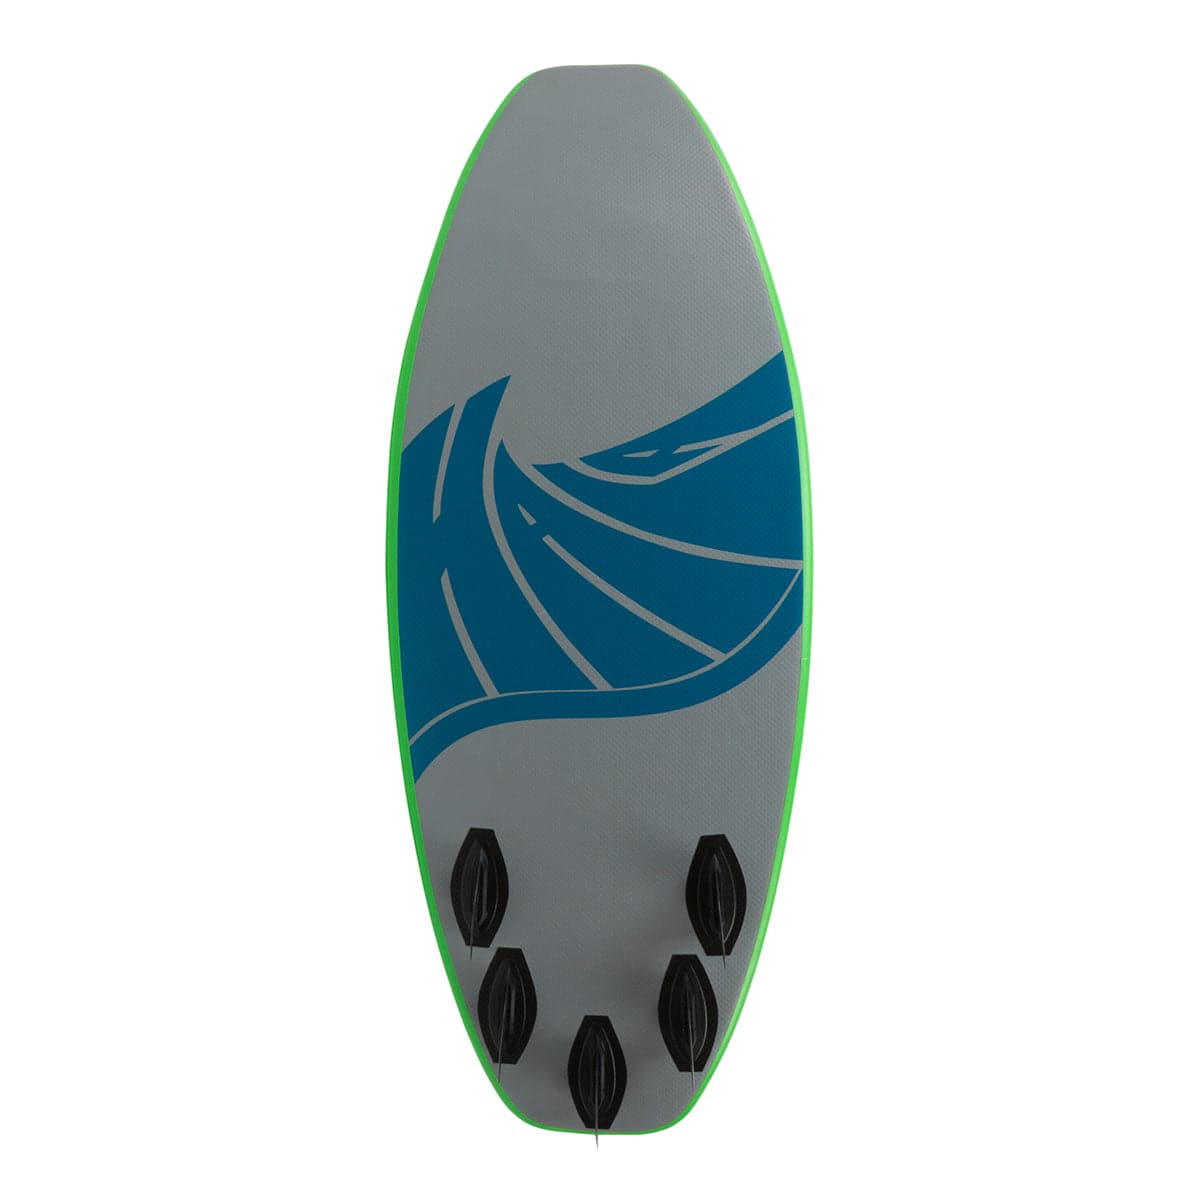 Featuring the Peño 6'11 Inflatable Surf SUP whitewater sup manufactured by Hala shown here from a second angle.